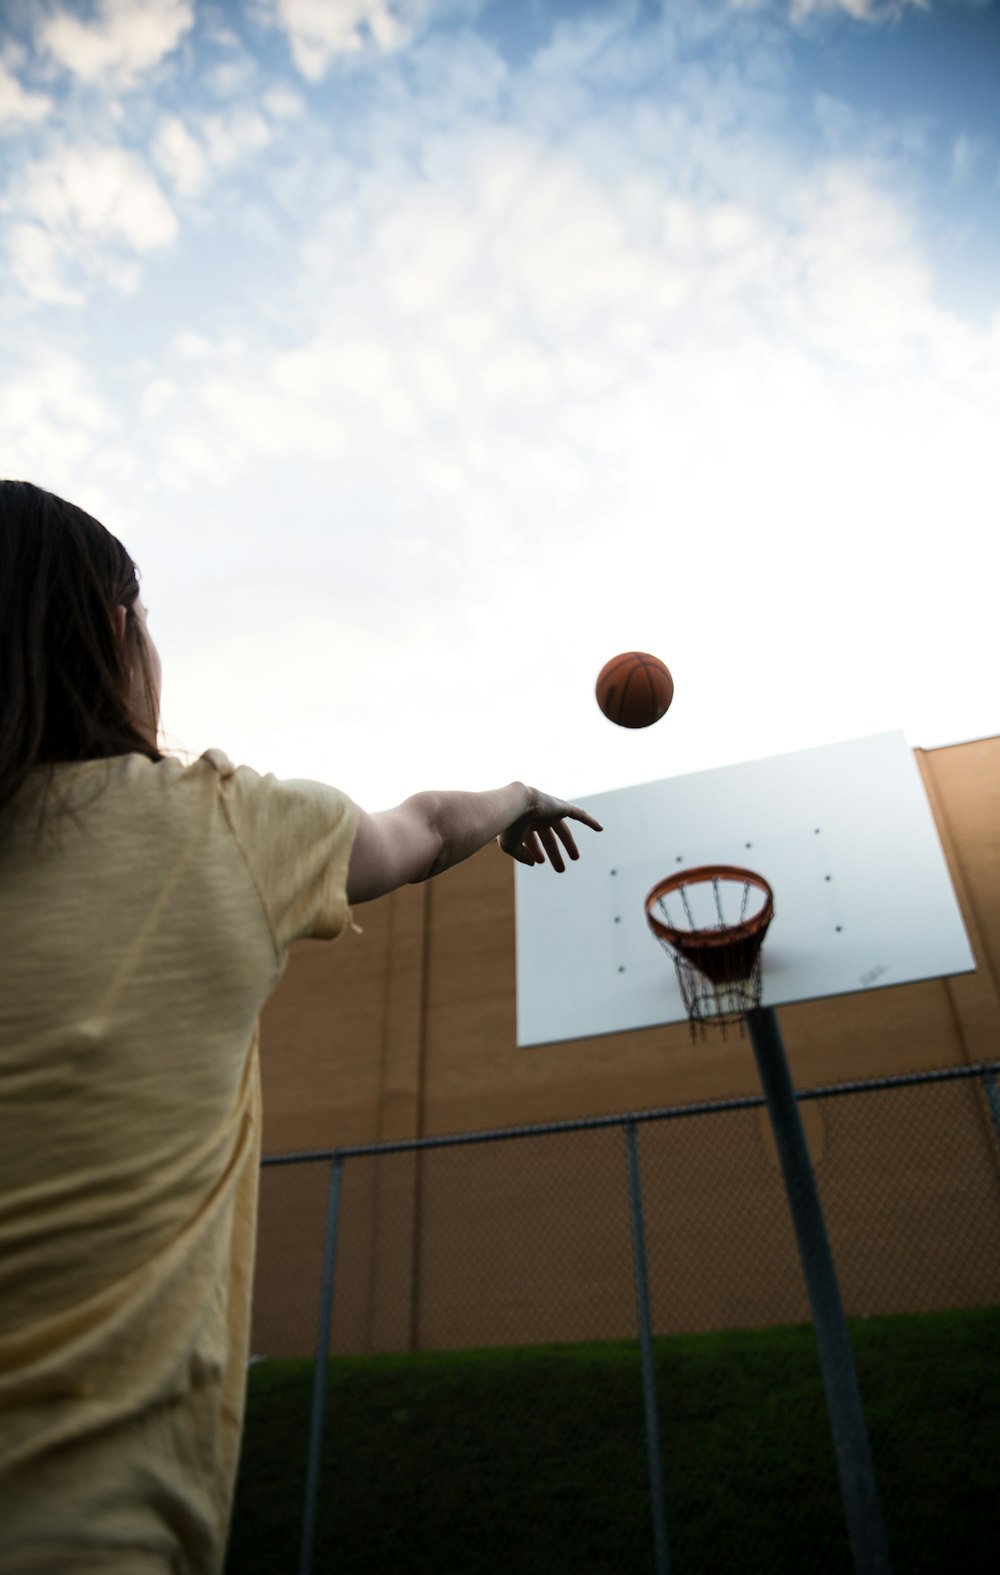 woman in white shirt holding basketball